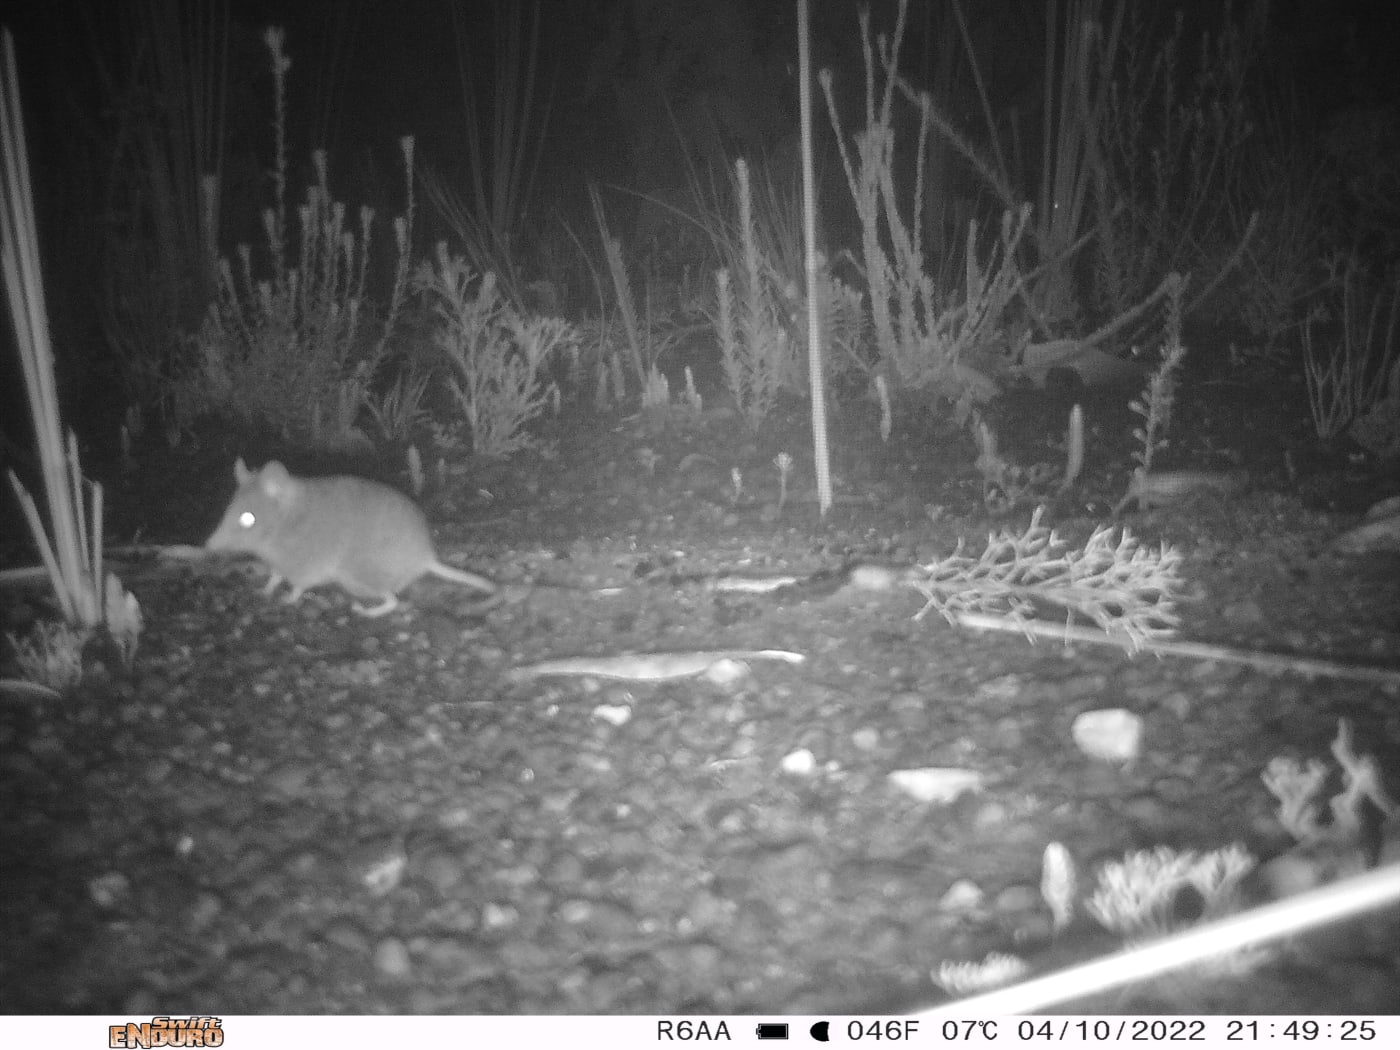 A sensor camera photo of a Kangaroo Island dunnart, taken as part of the Eyes on Recovery project.

Eyes on Recovery is a large-scale sensor camera project. and a collaboration between WWF, Conservation International, and local land managers and research organisations. Google-powered AI technology has been trained to identify Australian animals in photos to track the recovery of threatened species following the 2019-20 bushfires.